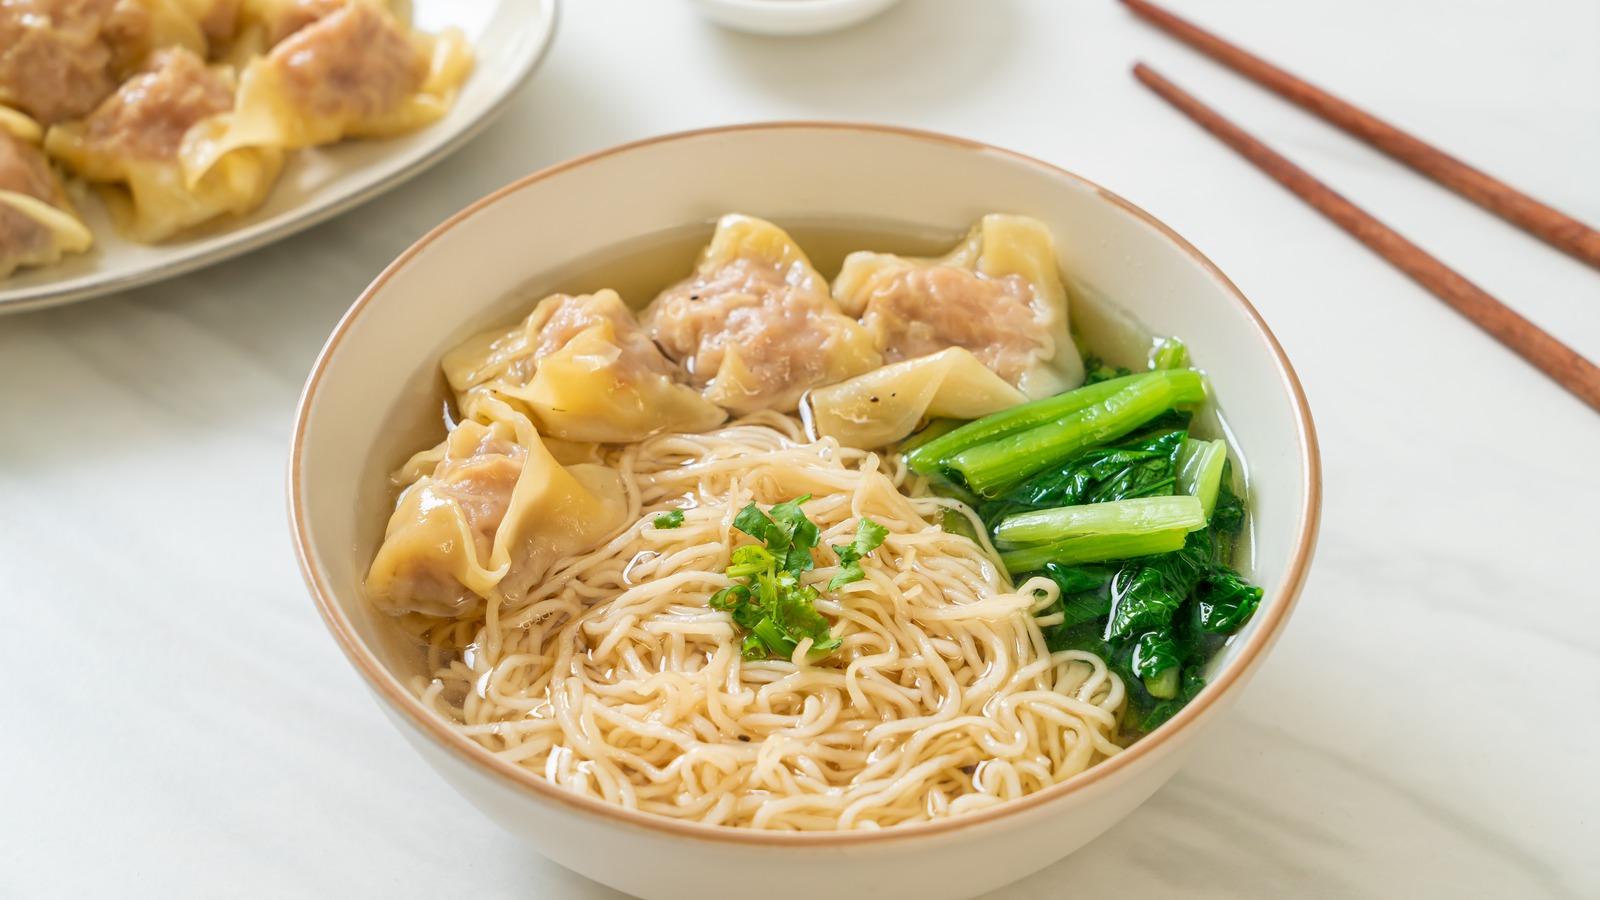 The Key For Making Wonton Noodle Soup That's Not A Mushy Mess